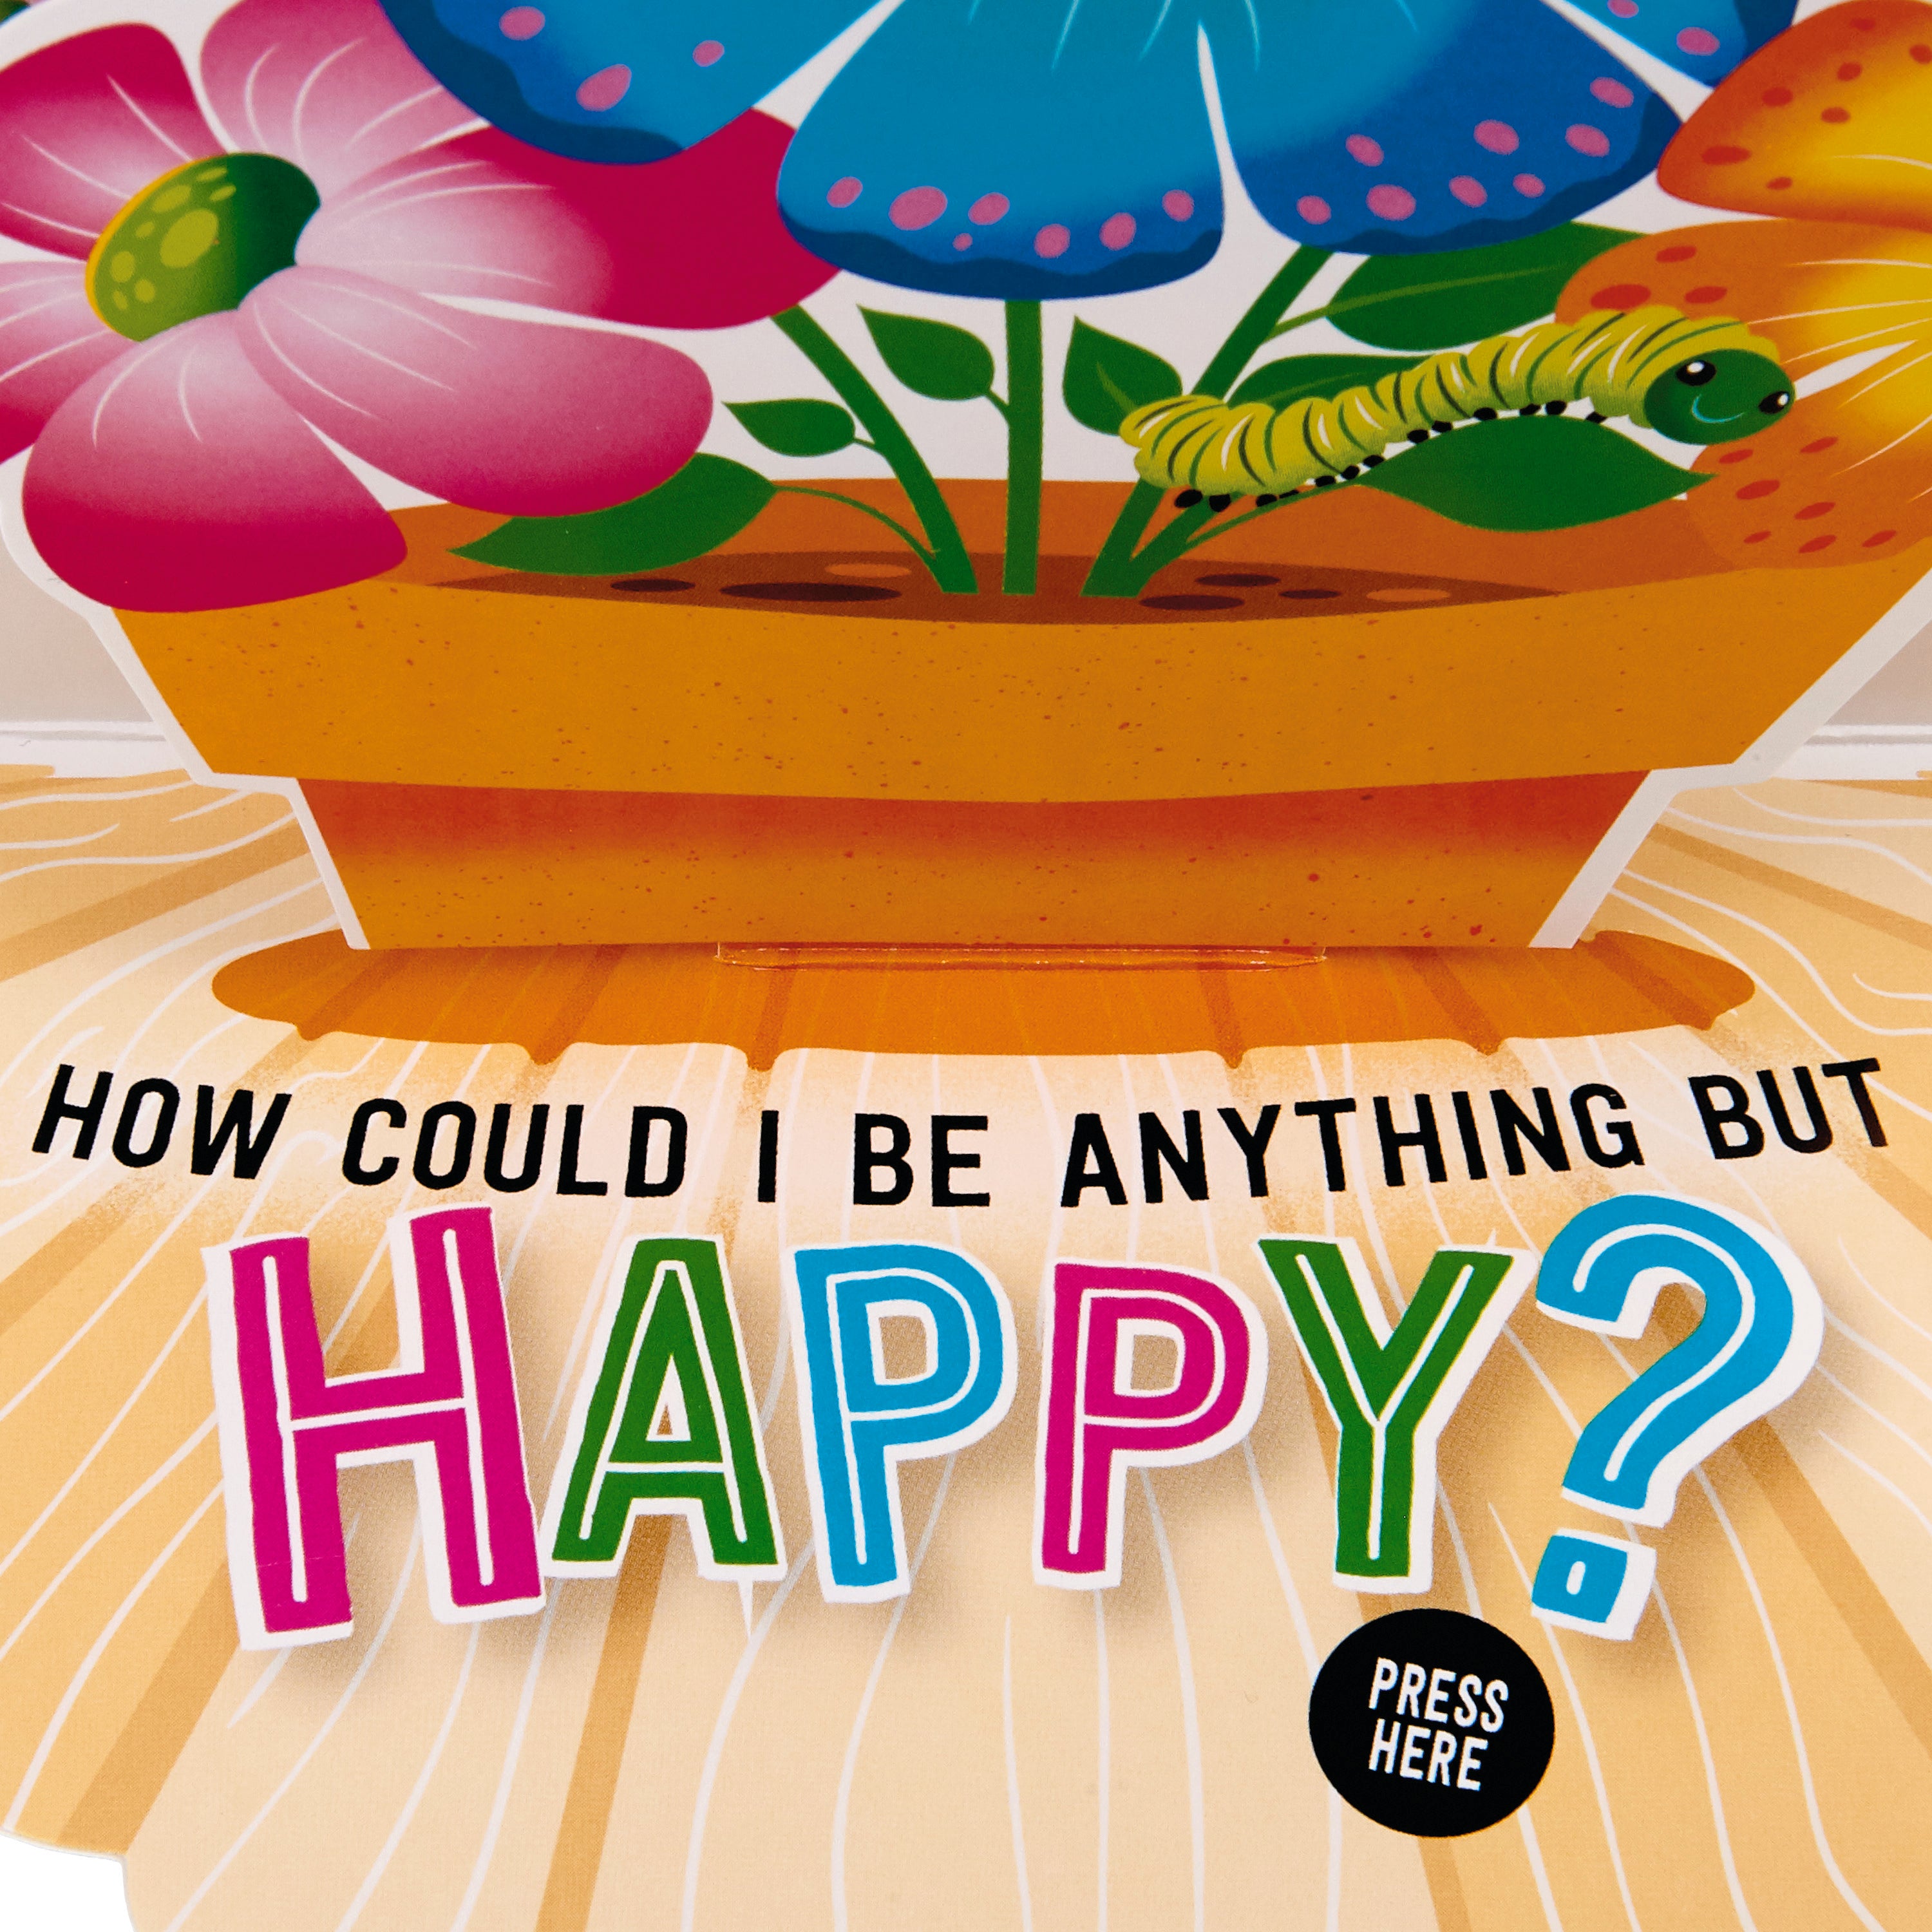 Pop Up Mother's Day Card with Song for Mom (Pot of Butterflies, Plays Happy by Pharrell Williams)